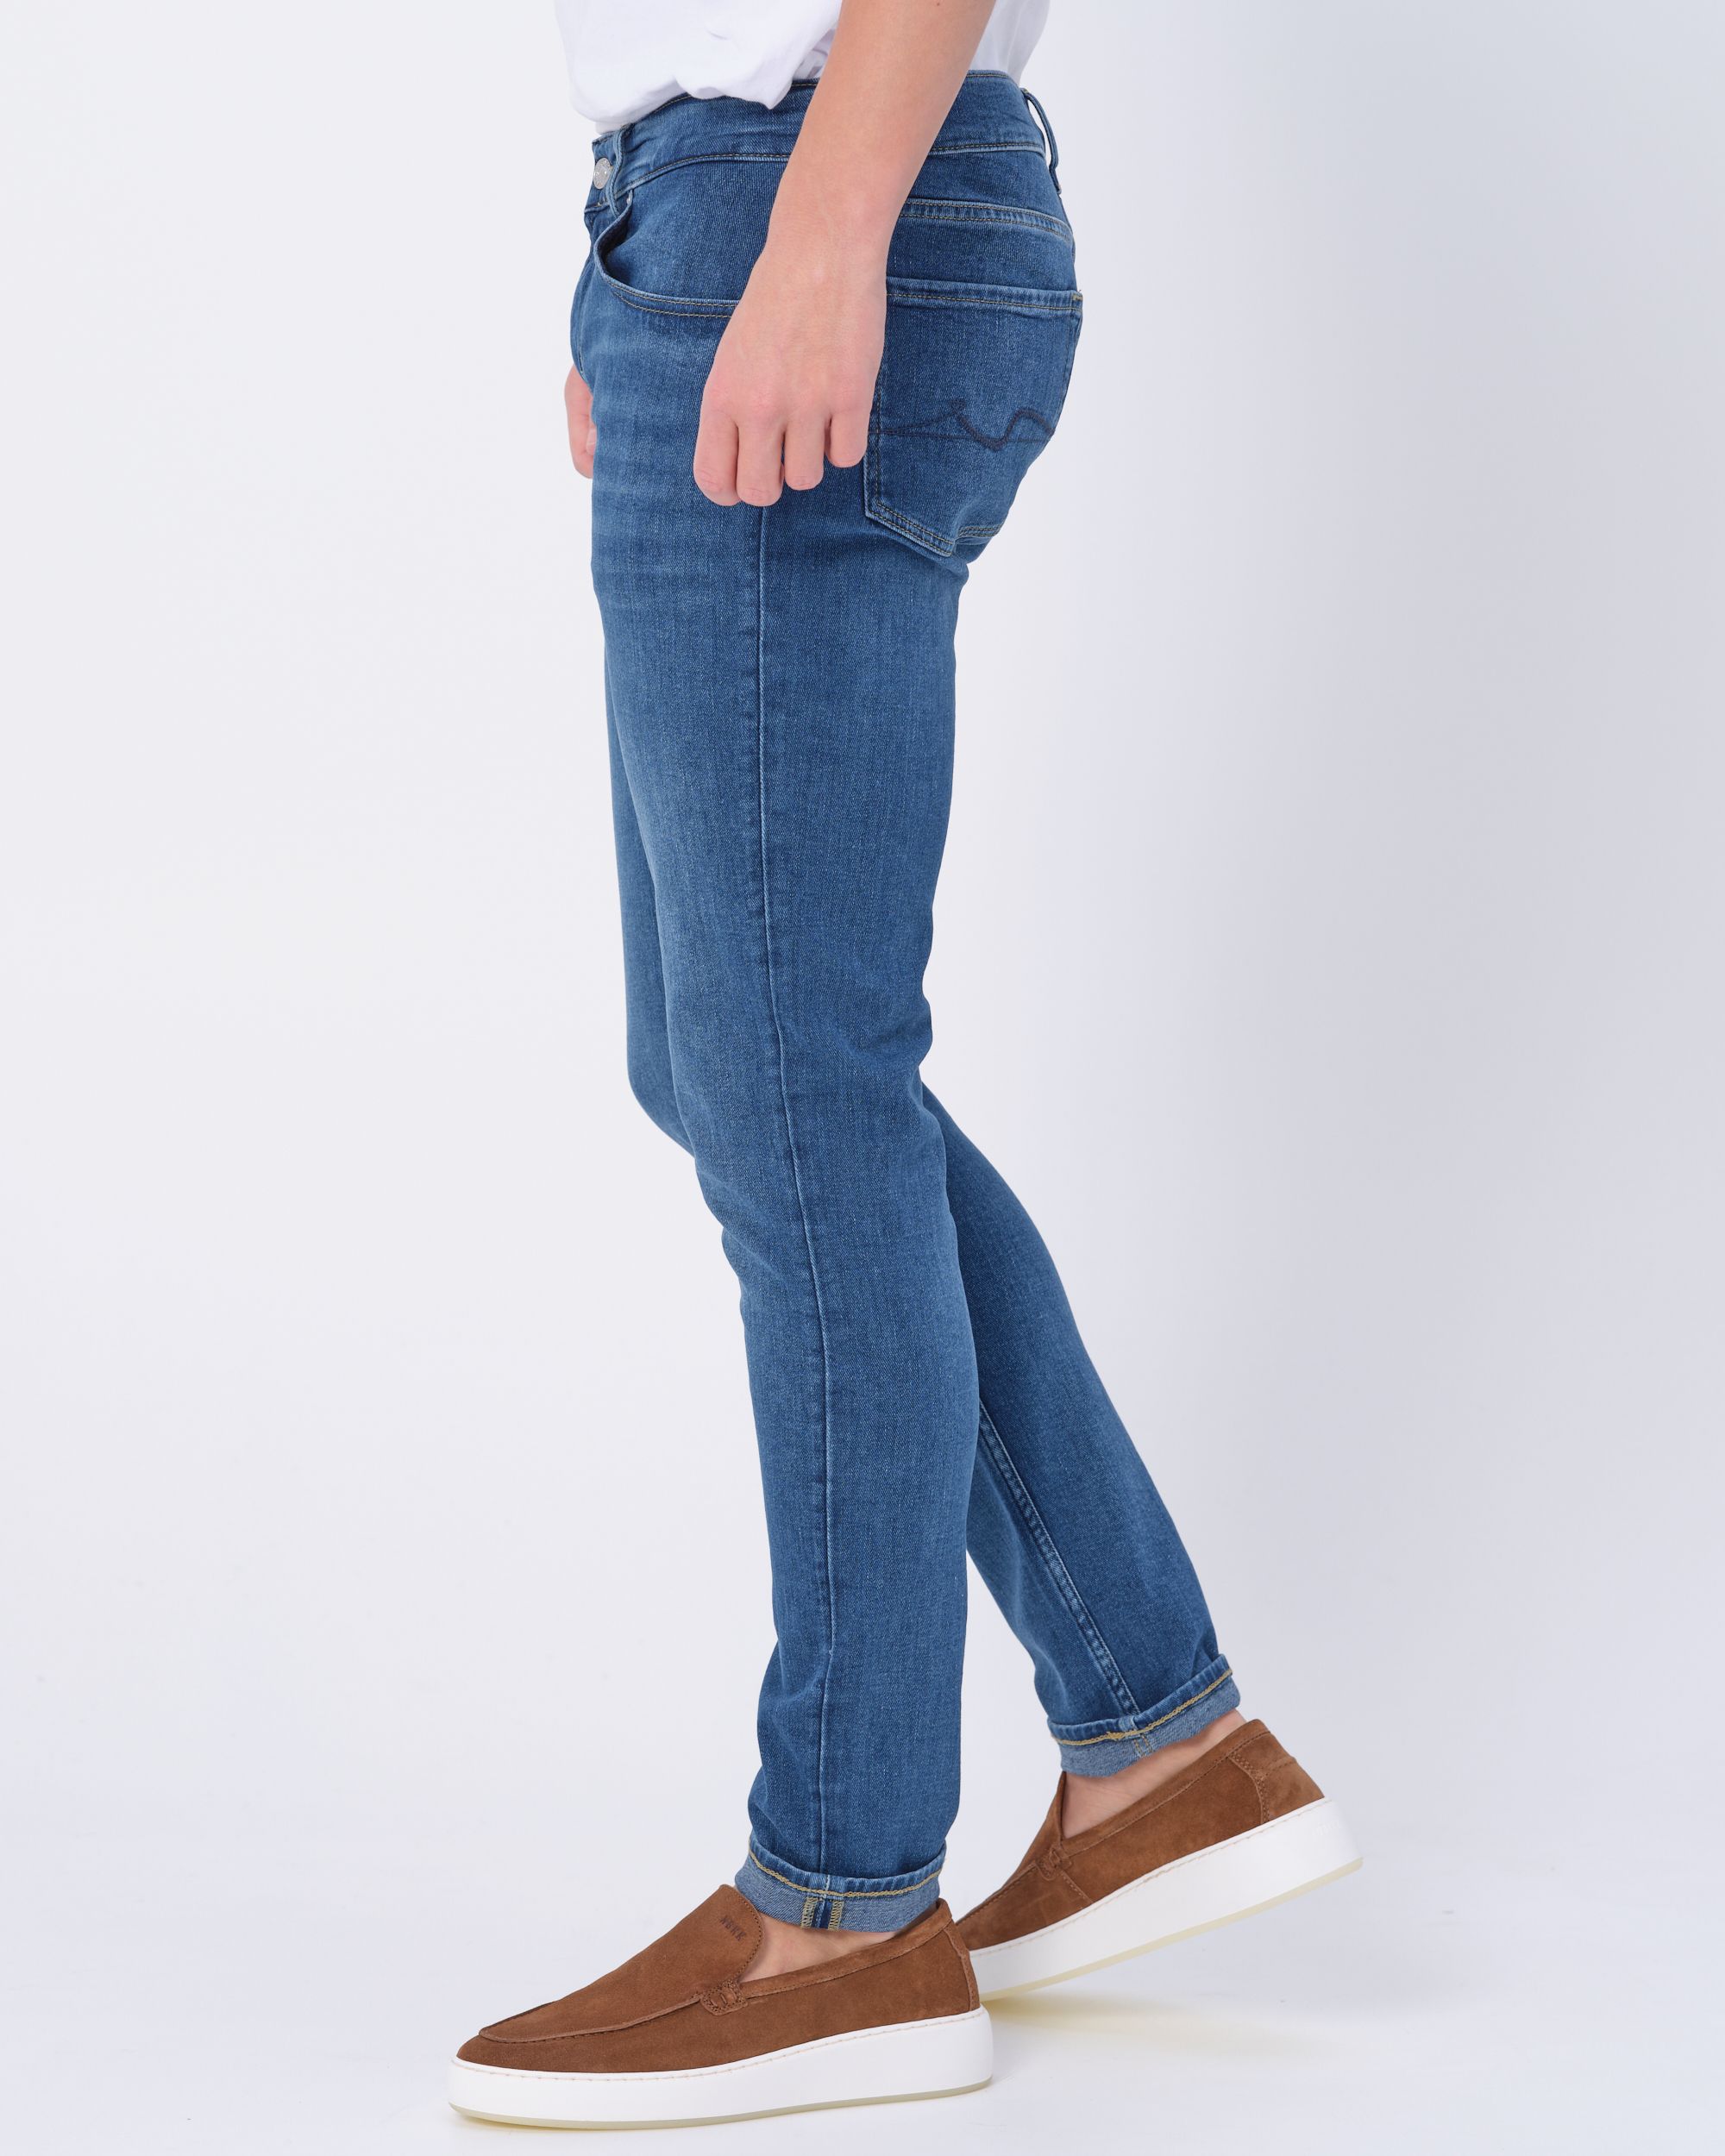 Seven for all mankind Jeans Blauw 083796-001-30